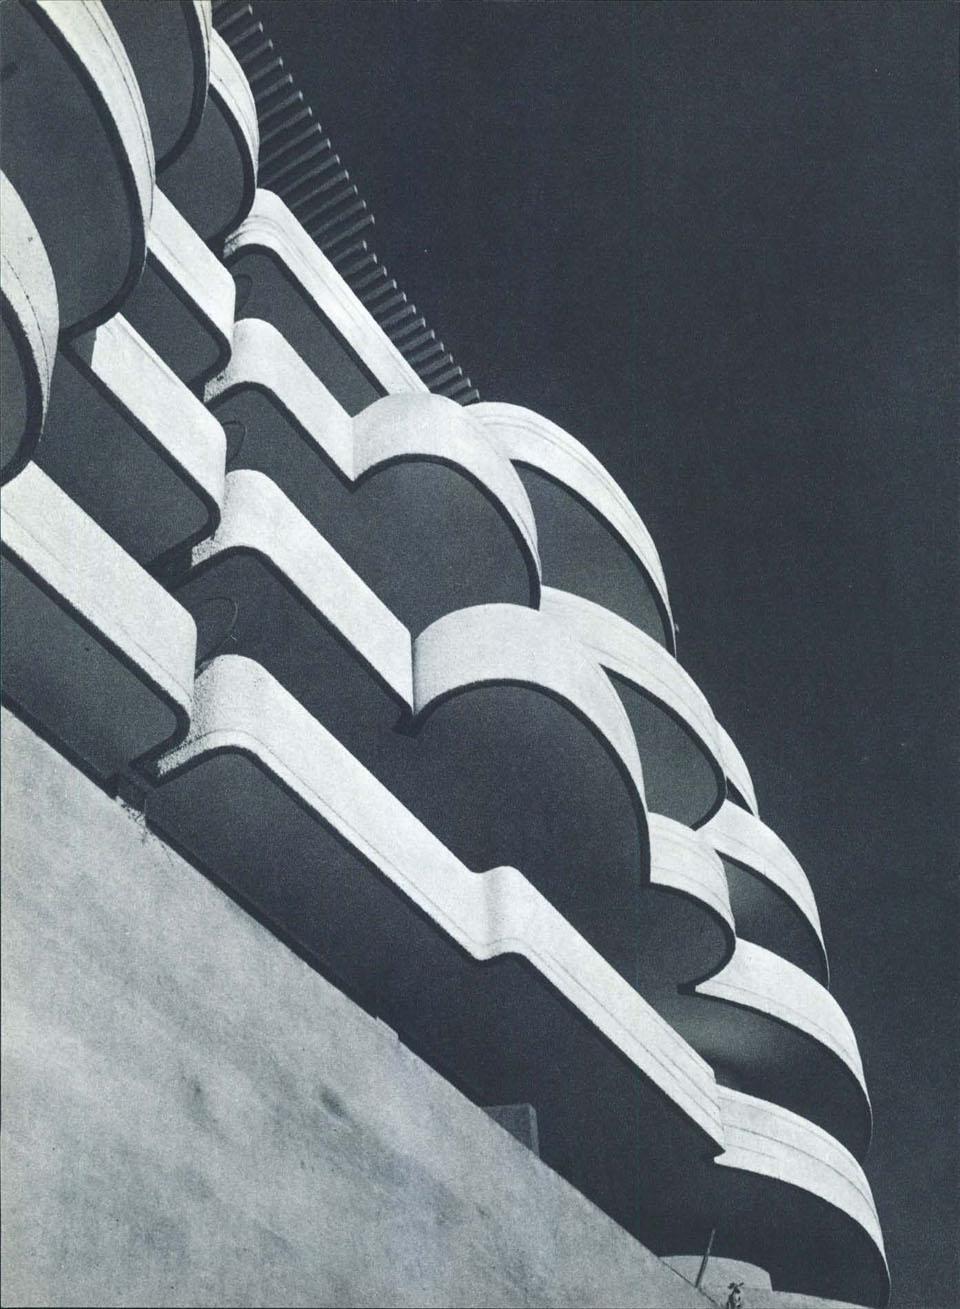 The terraces, horizontal overlapping tub-like forms, visually eliminate the entire vertical wall. The building’s perimeter, which is set back, disappears, revealing  the interior reaching out towards  the exterior.  There is no longer a facade but a continuous curving surface born from free design and not from fixed rules or structural needs